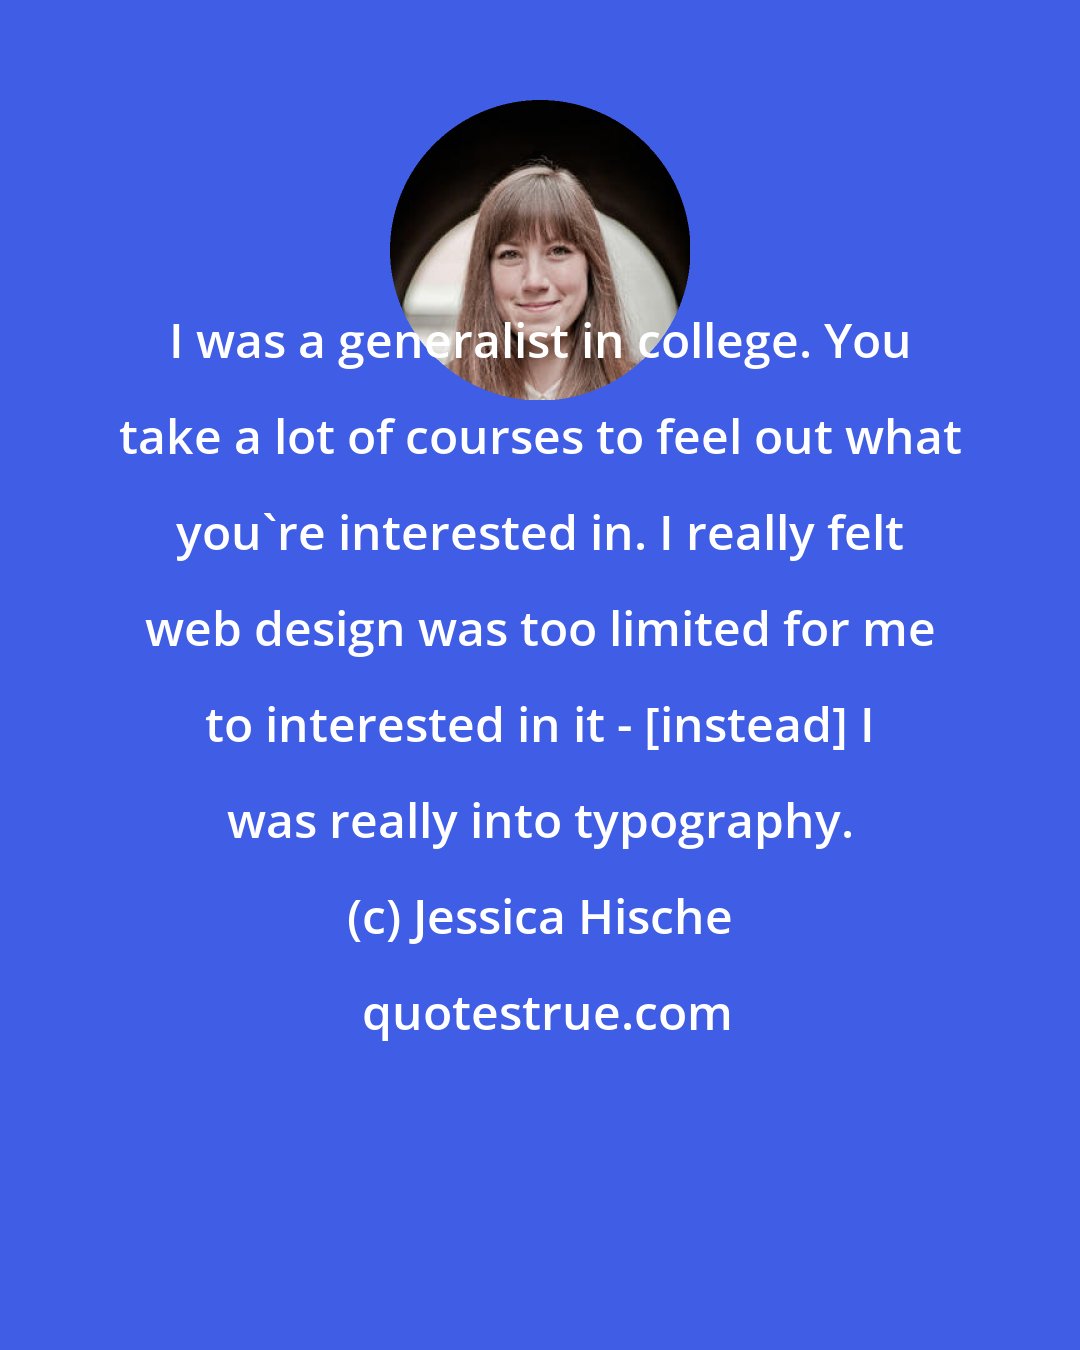 Jessica Hische: I was a generalist in college. You take a lot of courses to feel out what you're interested in. I really felt web design was too limited for me to interested in it - [instead] I was really into typography.